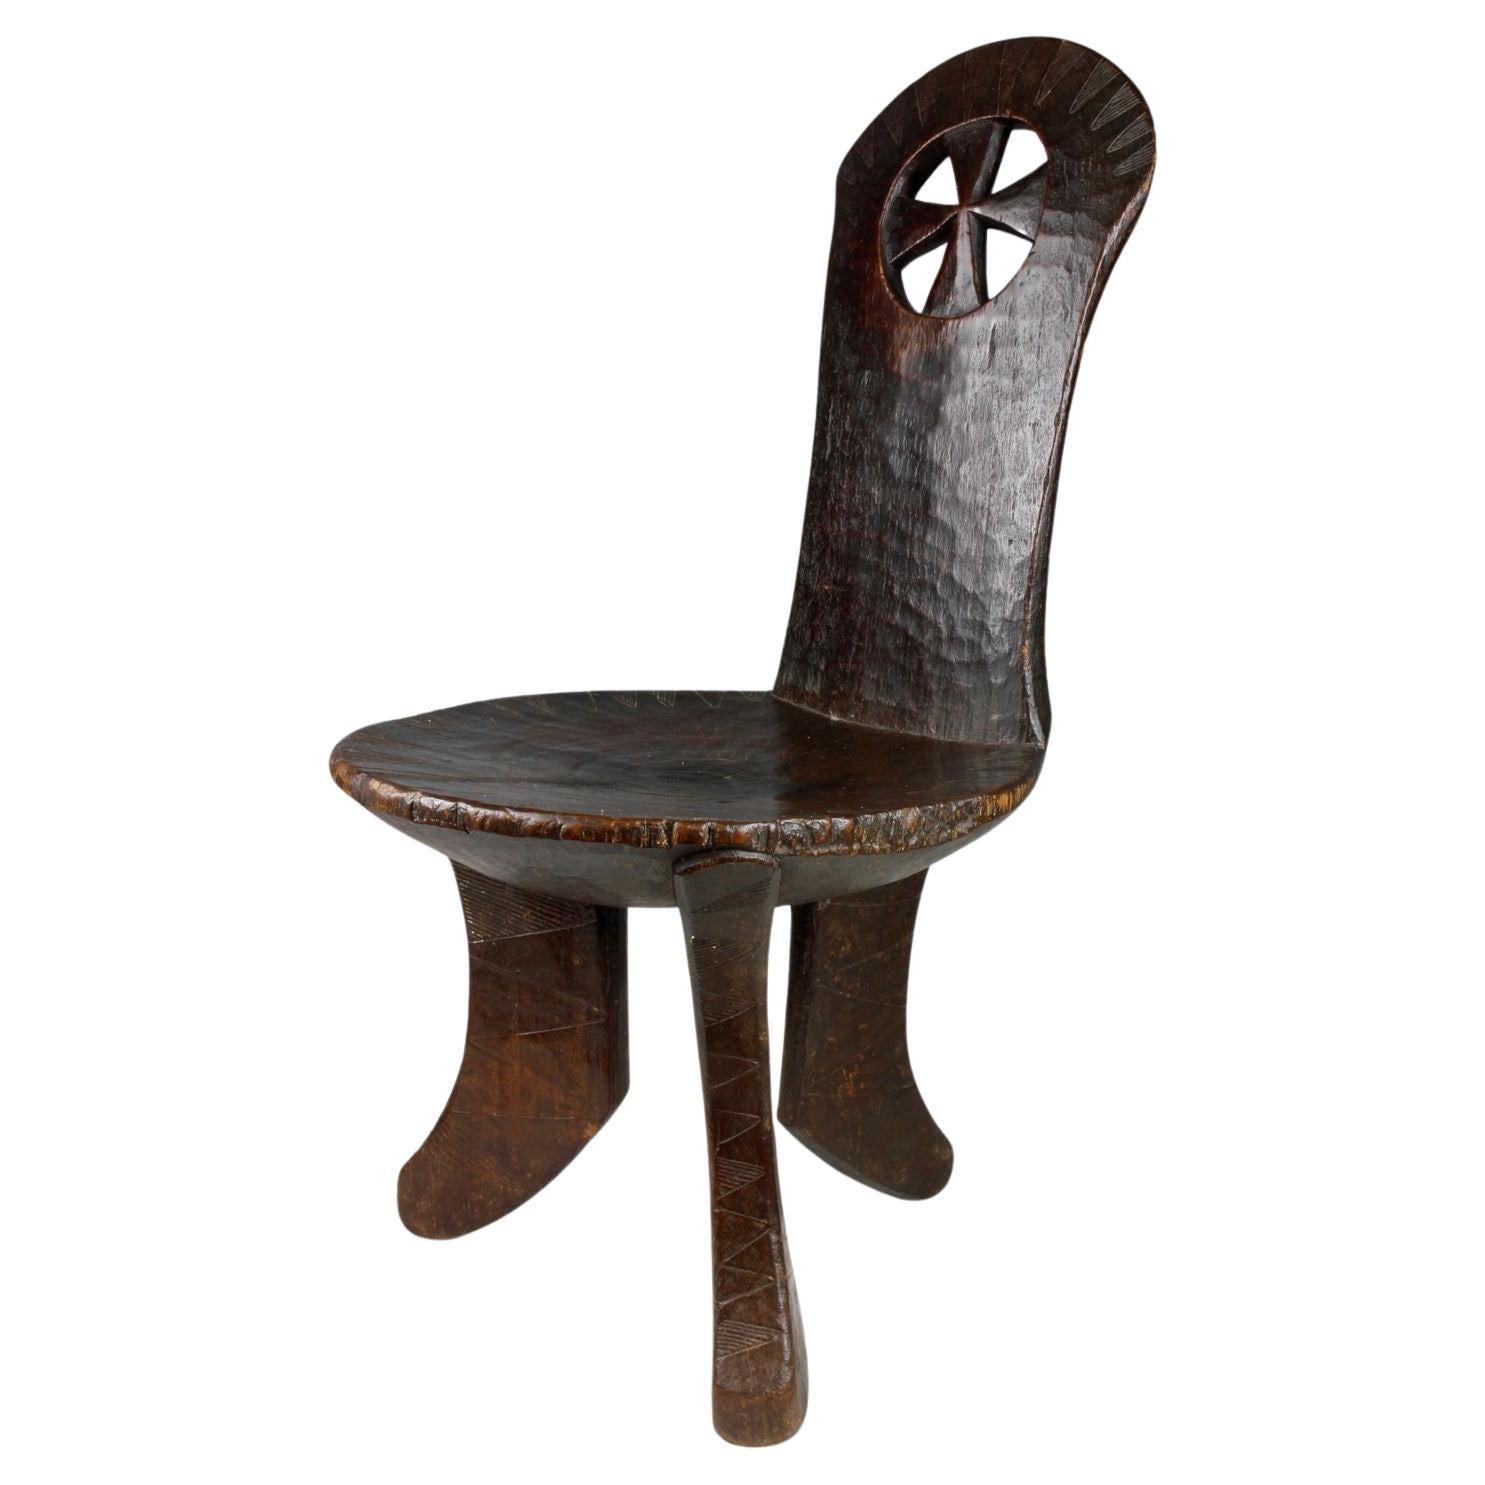 Late 19th Century/Early 20th Century High-Backed Ethiopian Chair For Sale